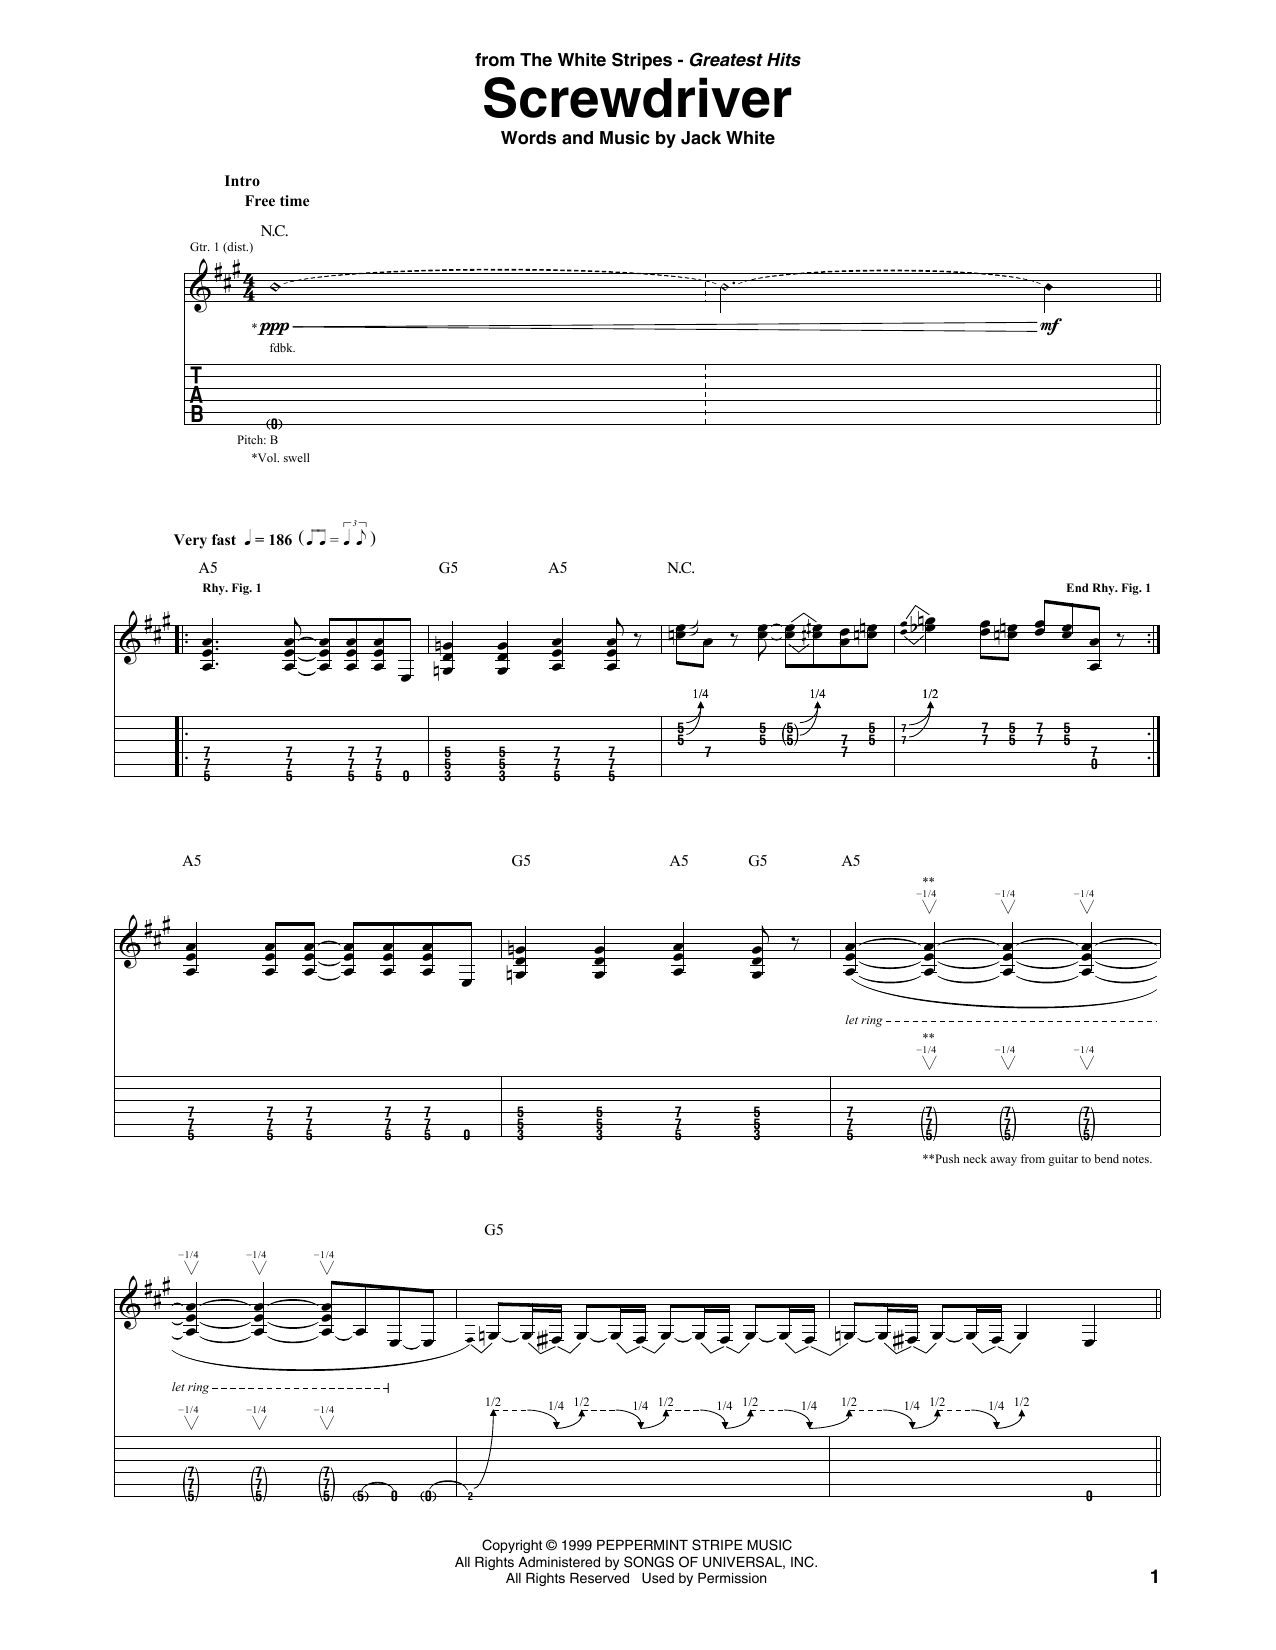 Download The White Stripes Screwdriver Sheet Music